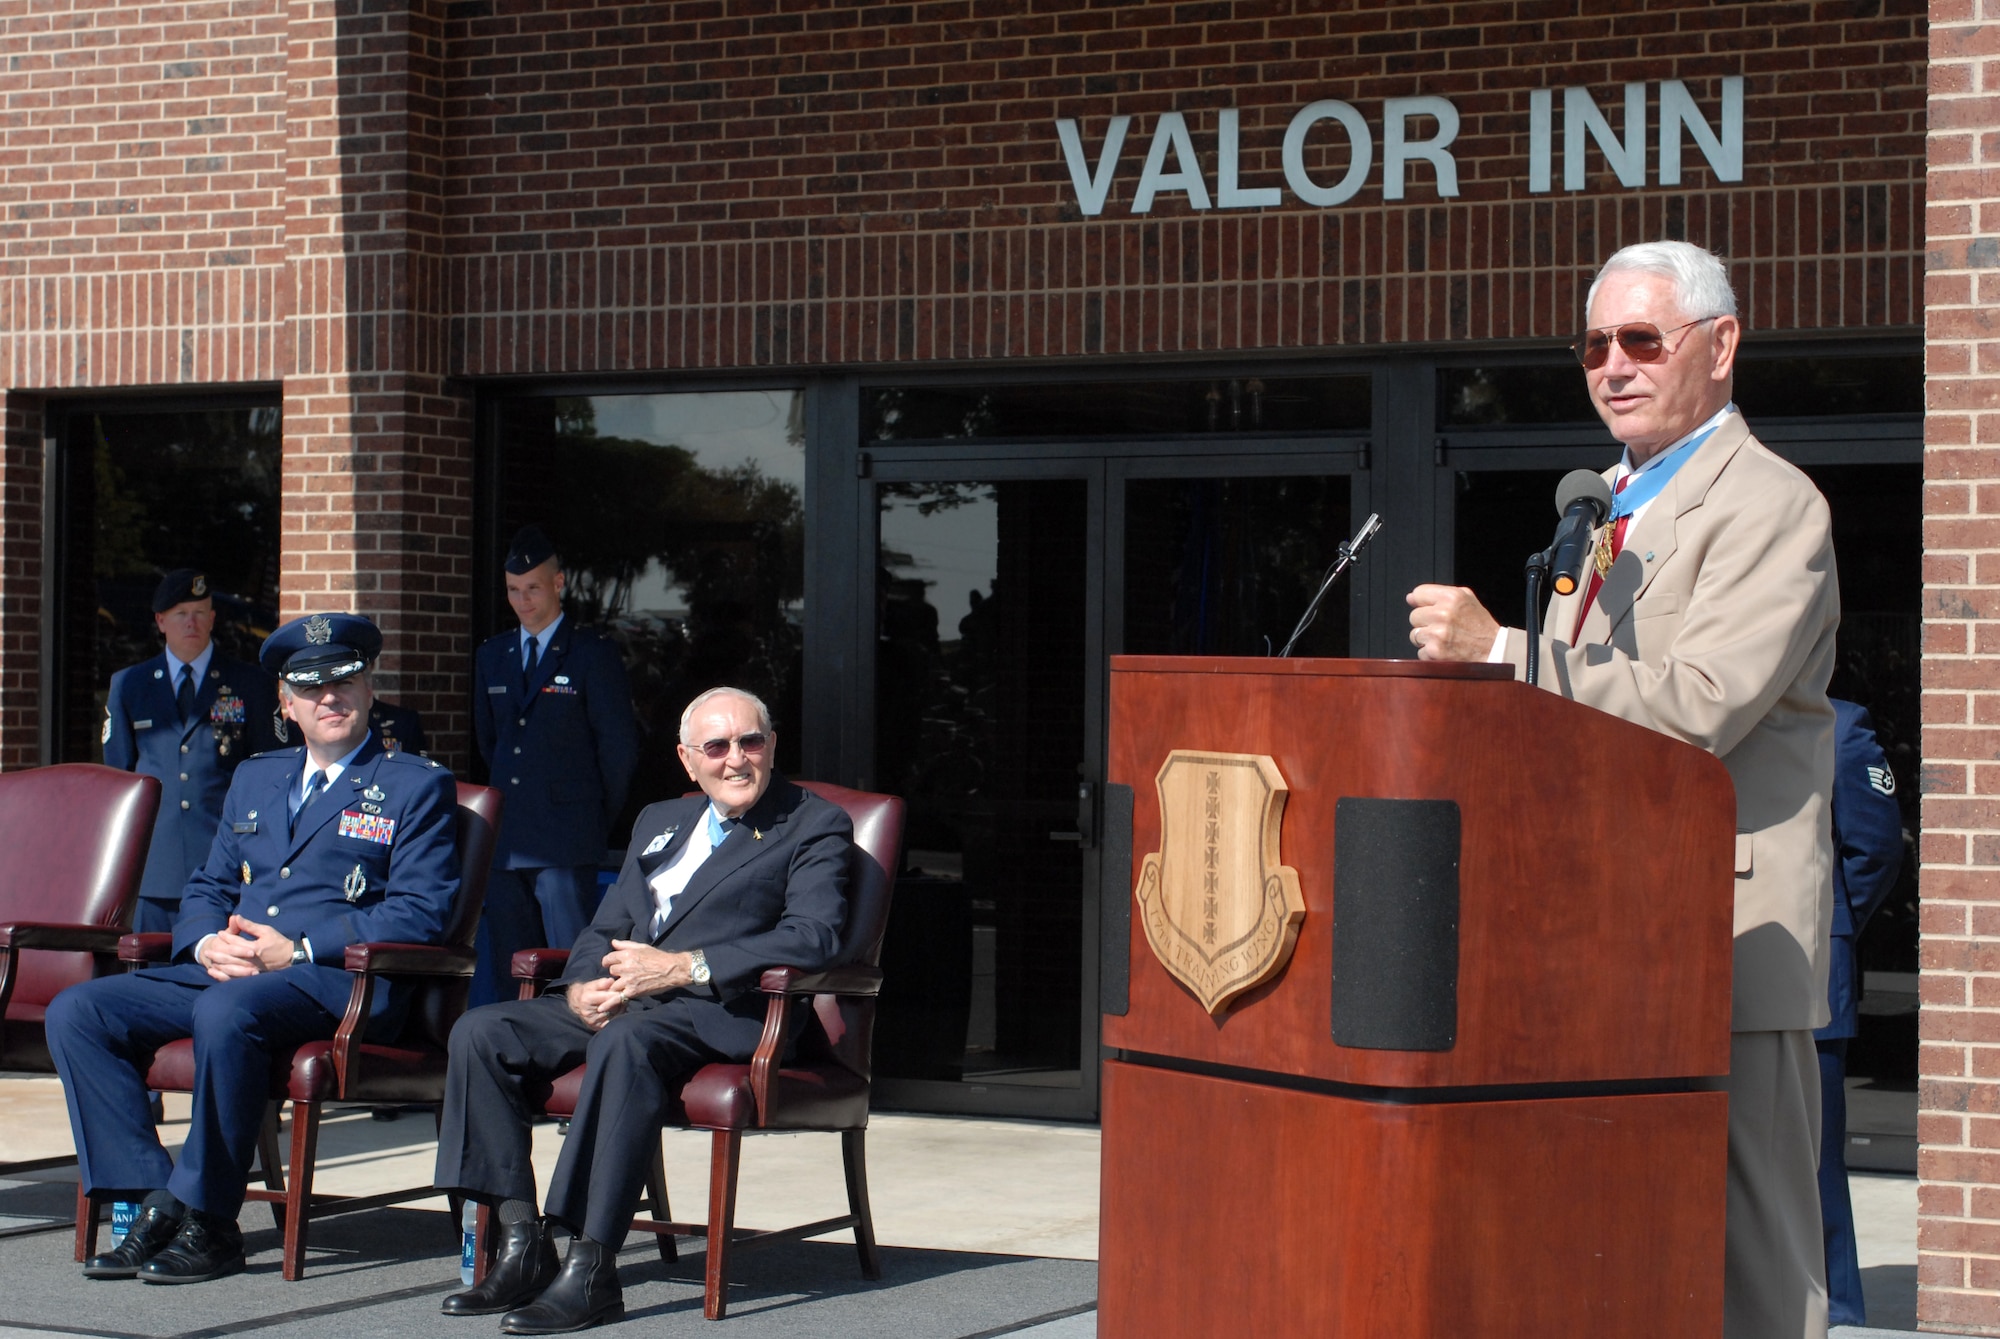 Medal of Honor recipient Col Leo Thorsness speaks during a dedication ceremony of two buildings in honor of himself and fellow Medal of Honor recipient Col.  George E. “Bud” Day May 7 on Goodfellow AFB, Texas. (U.S. Air Force photo/Master Sgt. Randy Mallard)